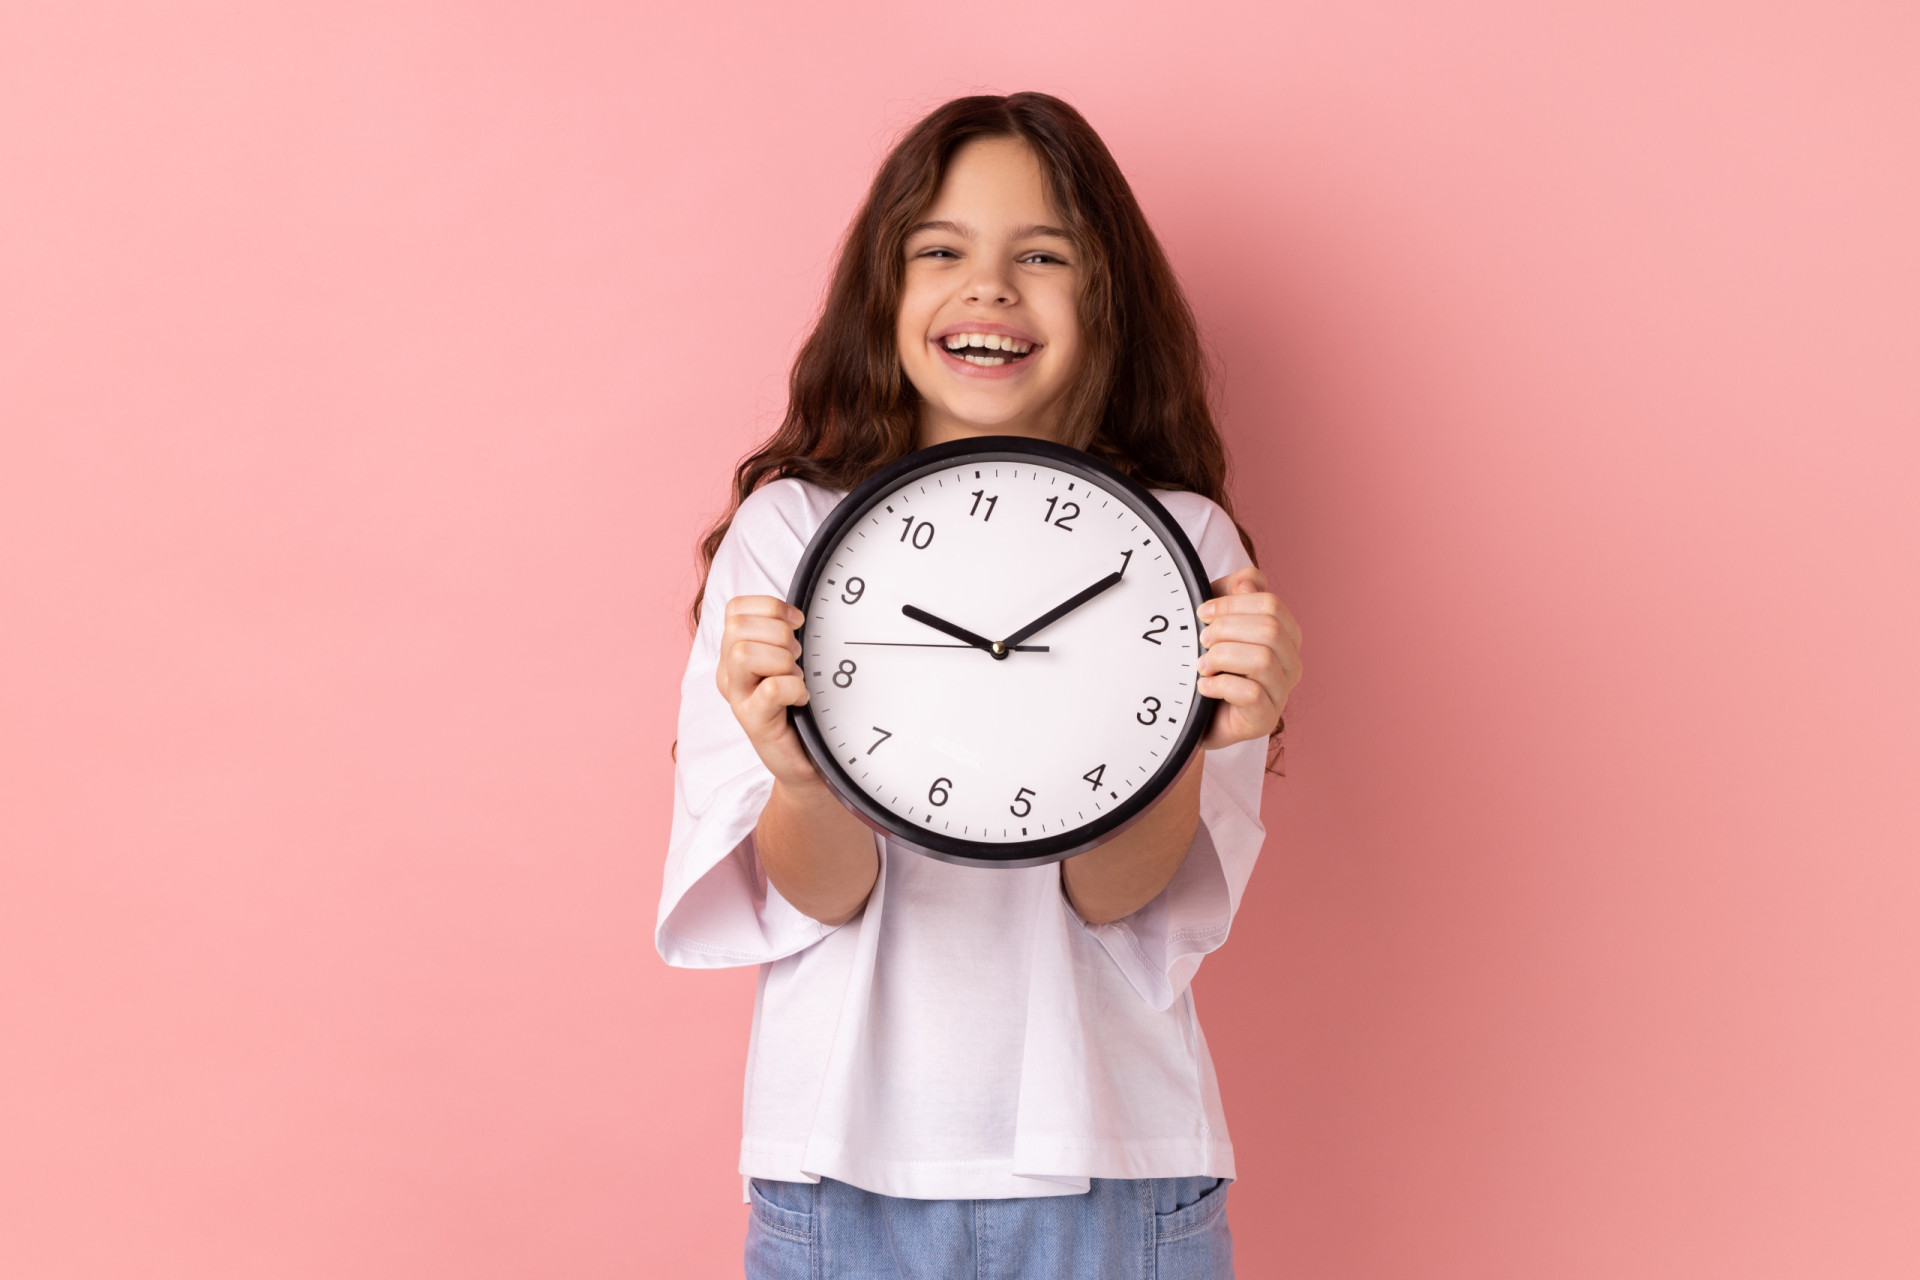 <p>Instilling the habit of punctuality in kids is more than showing up on time; it's about respecting others' time and valuing commitments.</p><p><a href="https://www.msn.com/en-us/community/channel/vid-7xx8mnucu55yw63we9va2gwr7uihbxwc68fxqp25x6tg4ftibpra?cvid=94631541bc0f4f89bfd59158d696ad7e">Follow us and access great exclusive content every day</a></p>